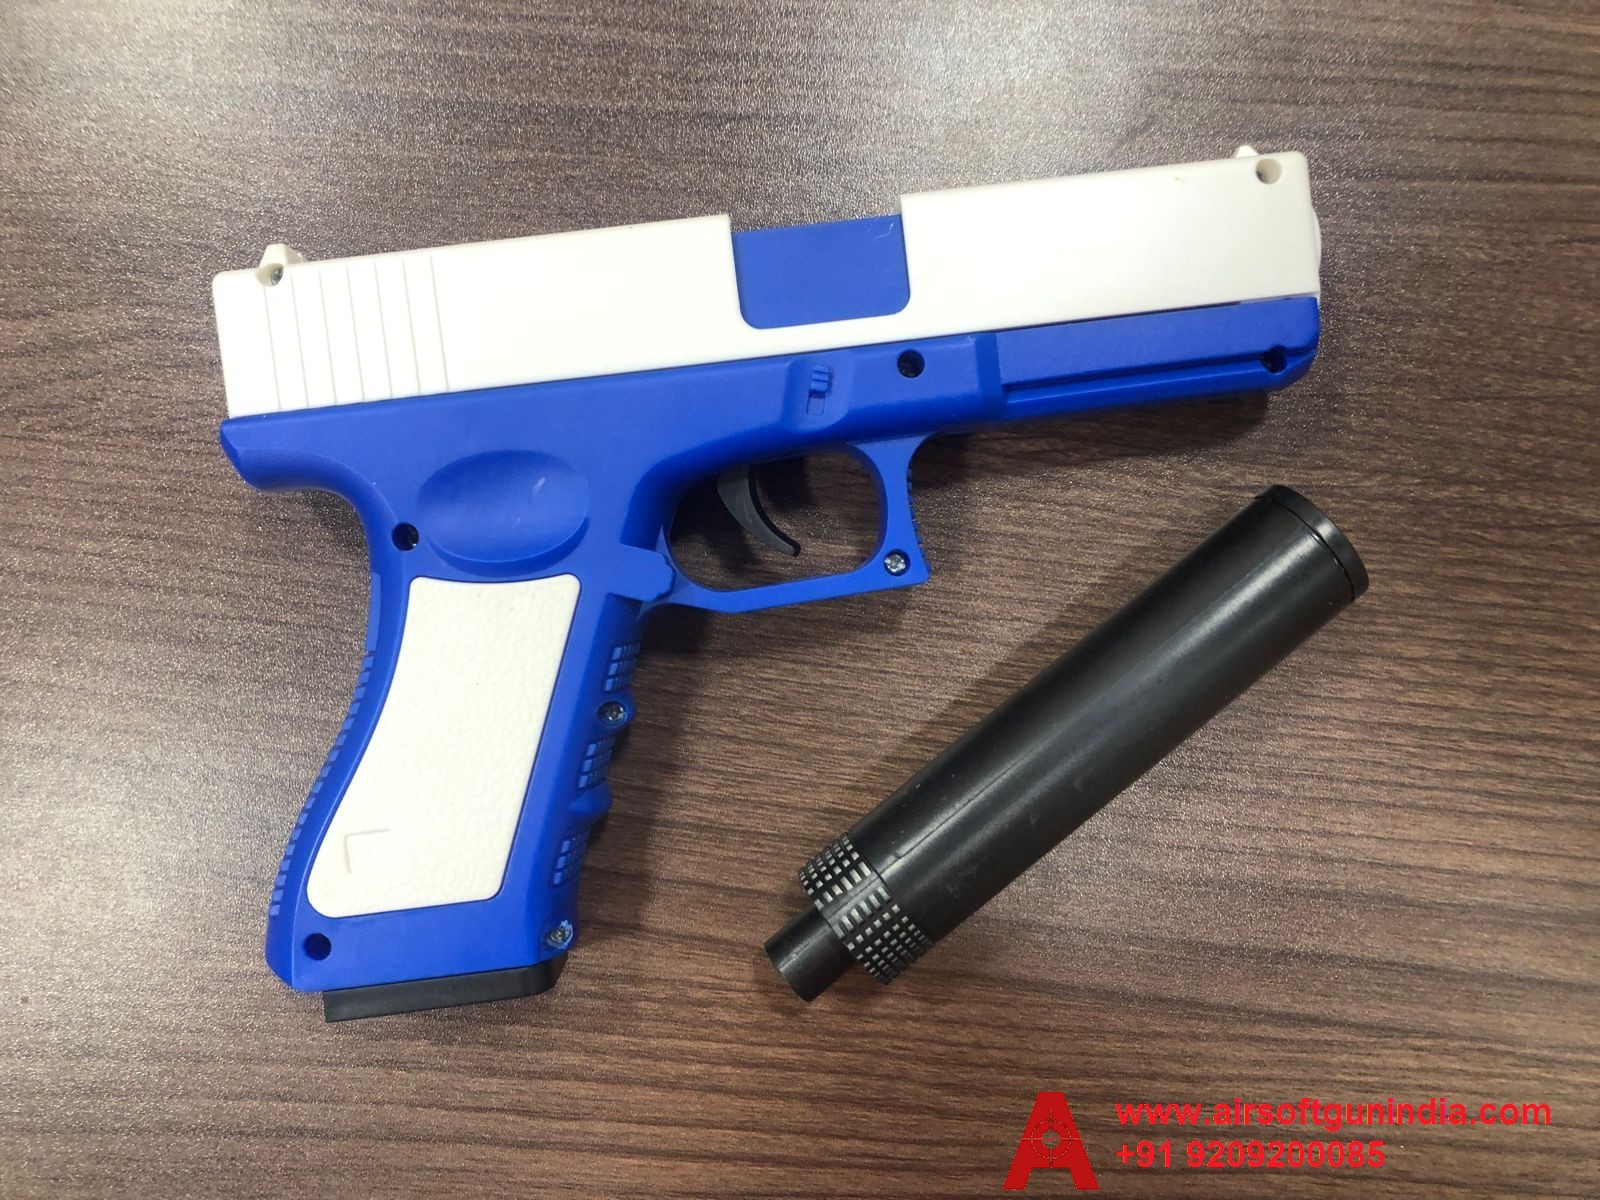 Shell Ejecting Glock 18 Soft Bullet Airsoft Pistol-Blue Shade